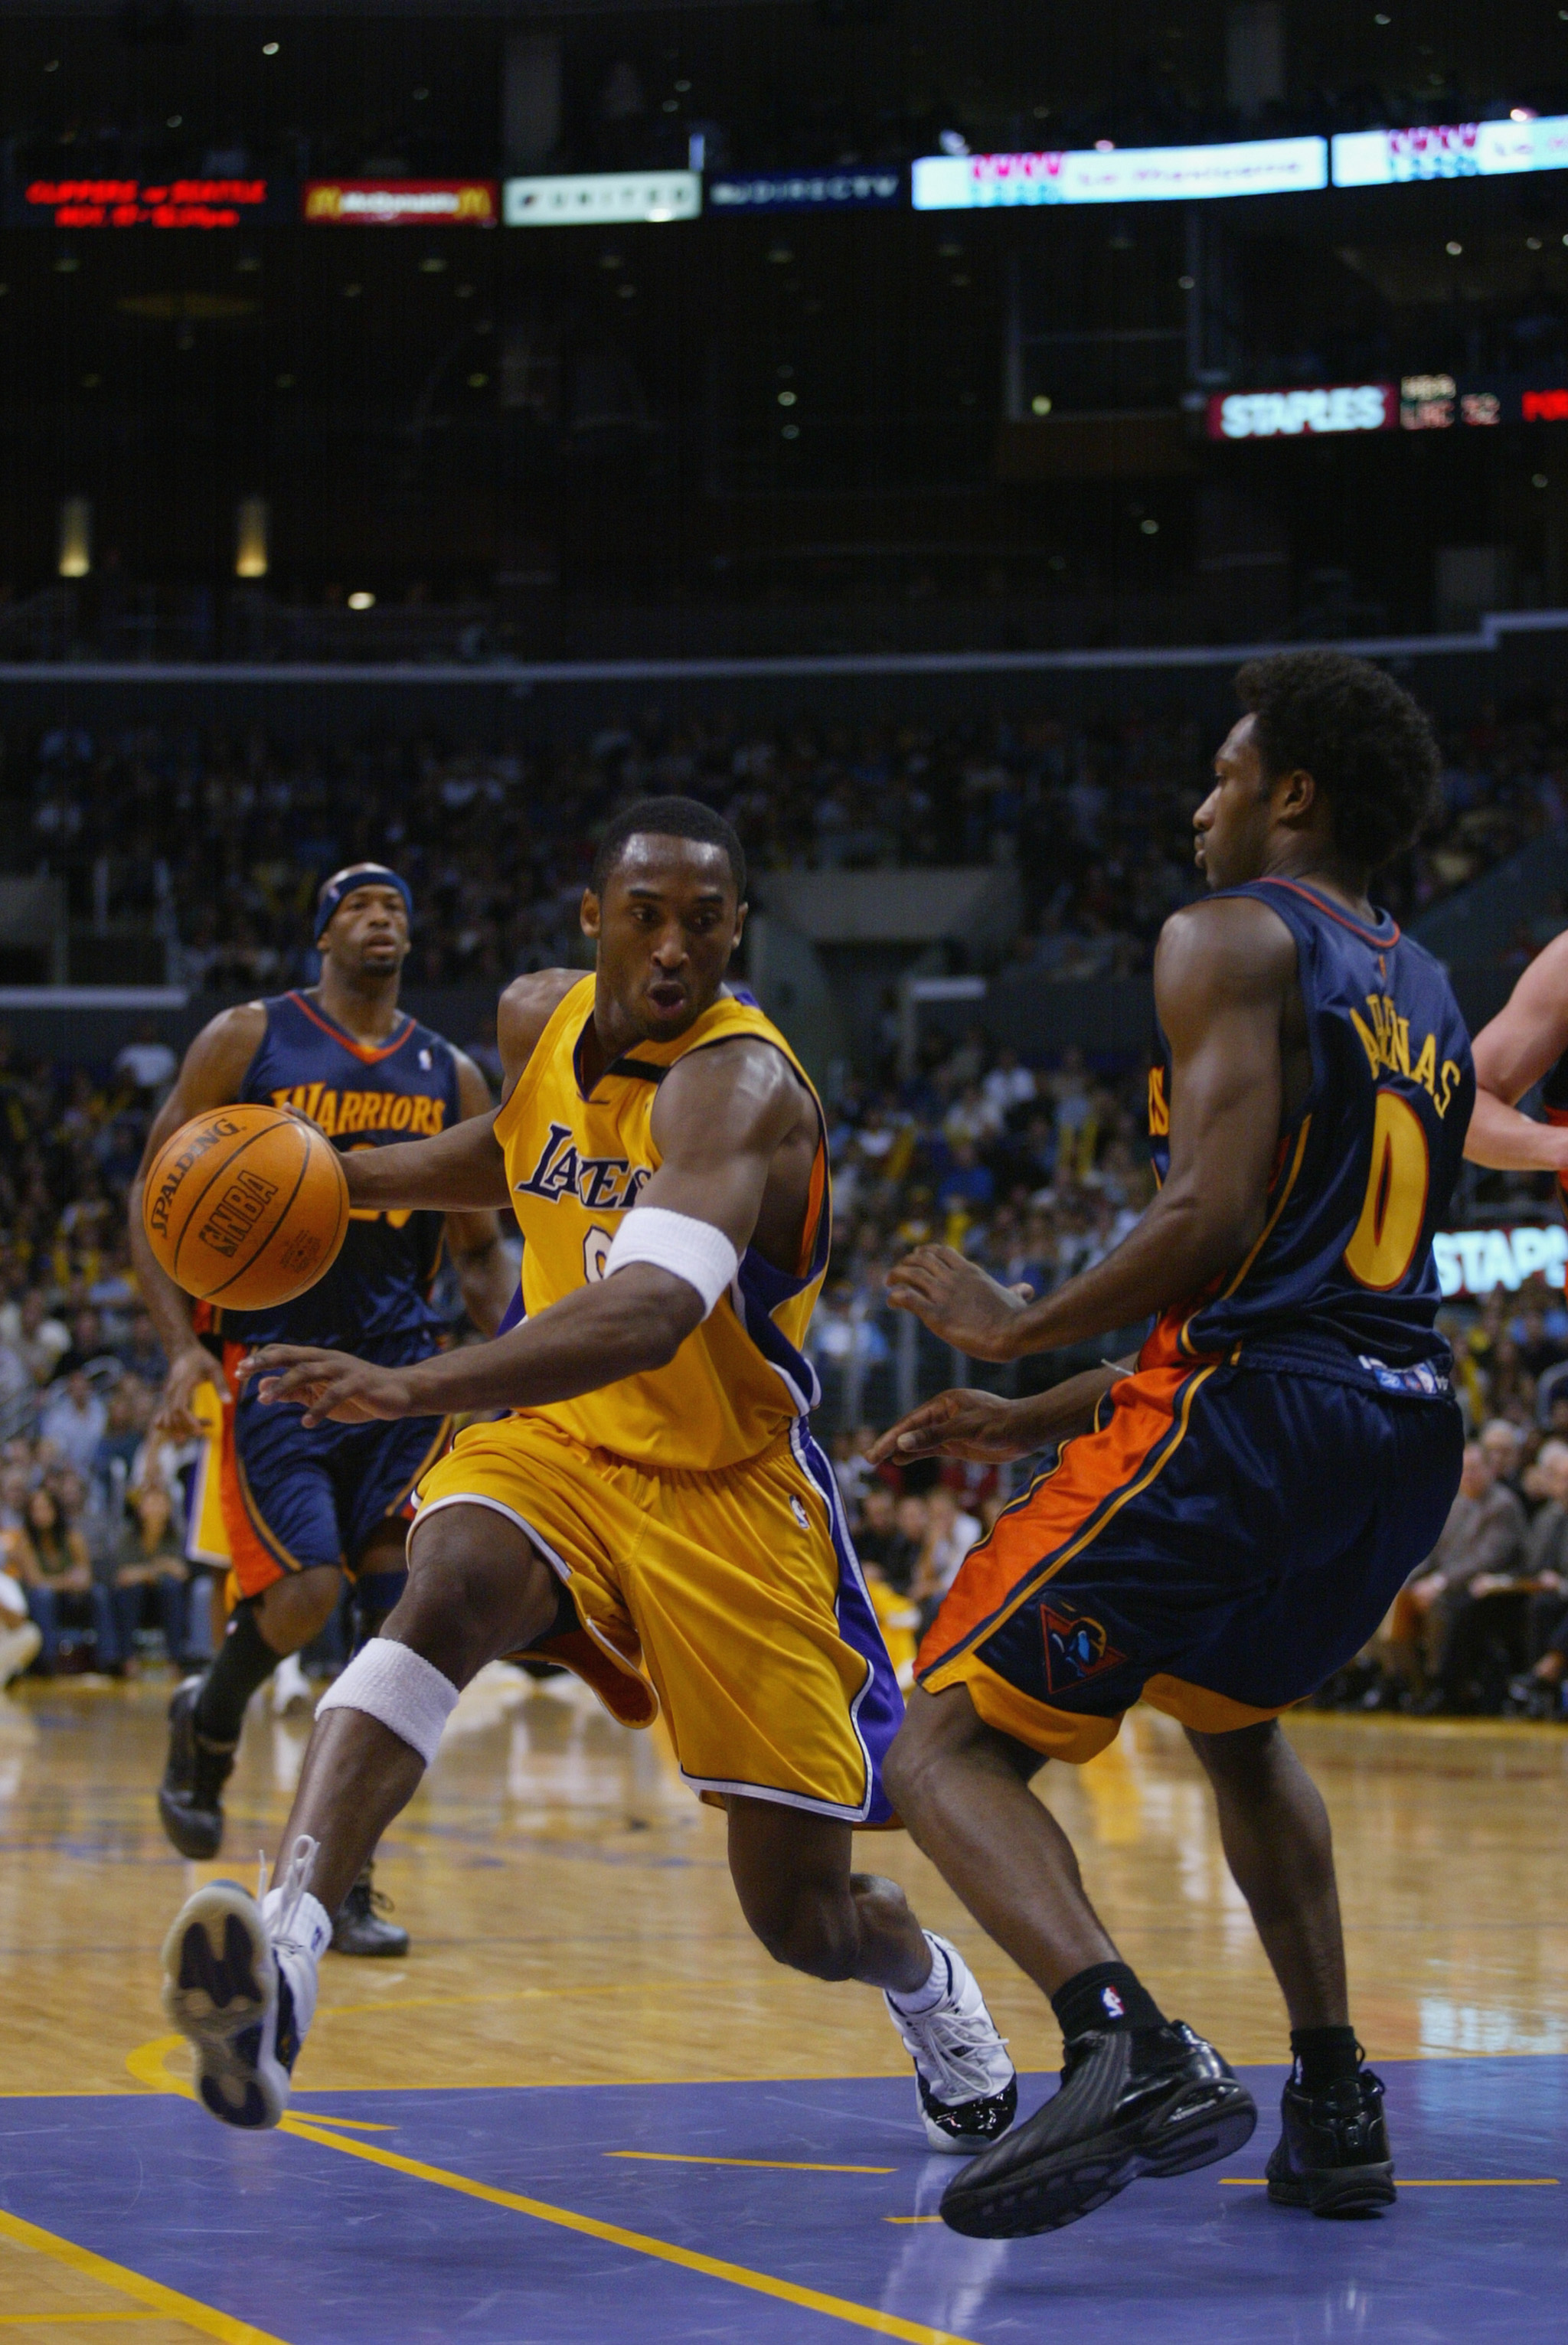 LOS ANGELES - NOVEMBER 15:  Kobe Bryant #8 of the Los Angeles Lakers drives to the basket past Gilbert Arenas #0 of the Golden State Warriors during the game at Staples Center on November 15, 2002 in Los Angeles, California.  The Lakers won 96-89 in overt